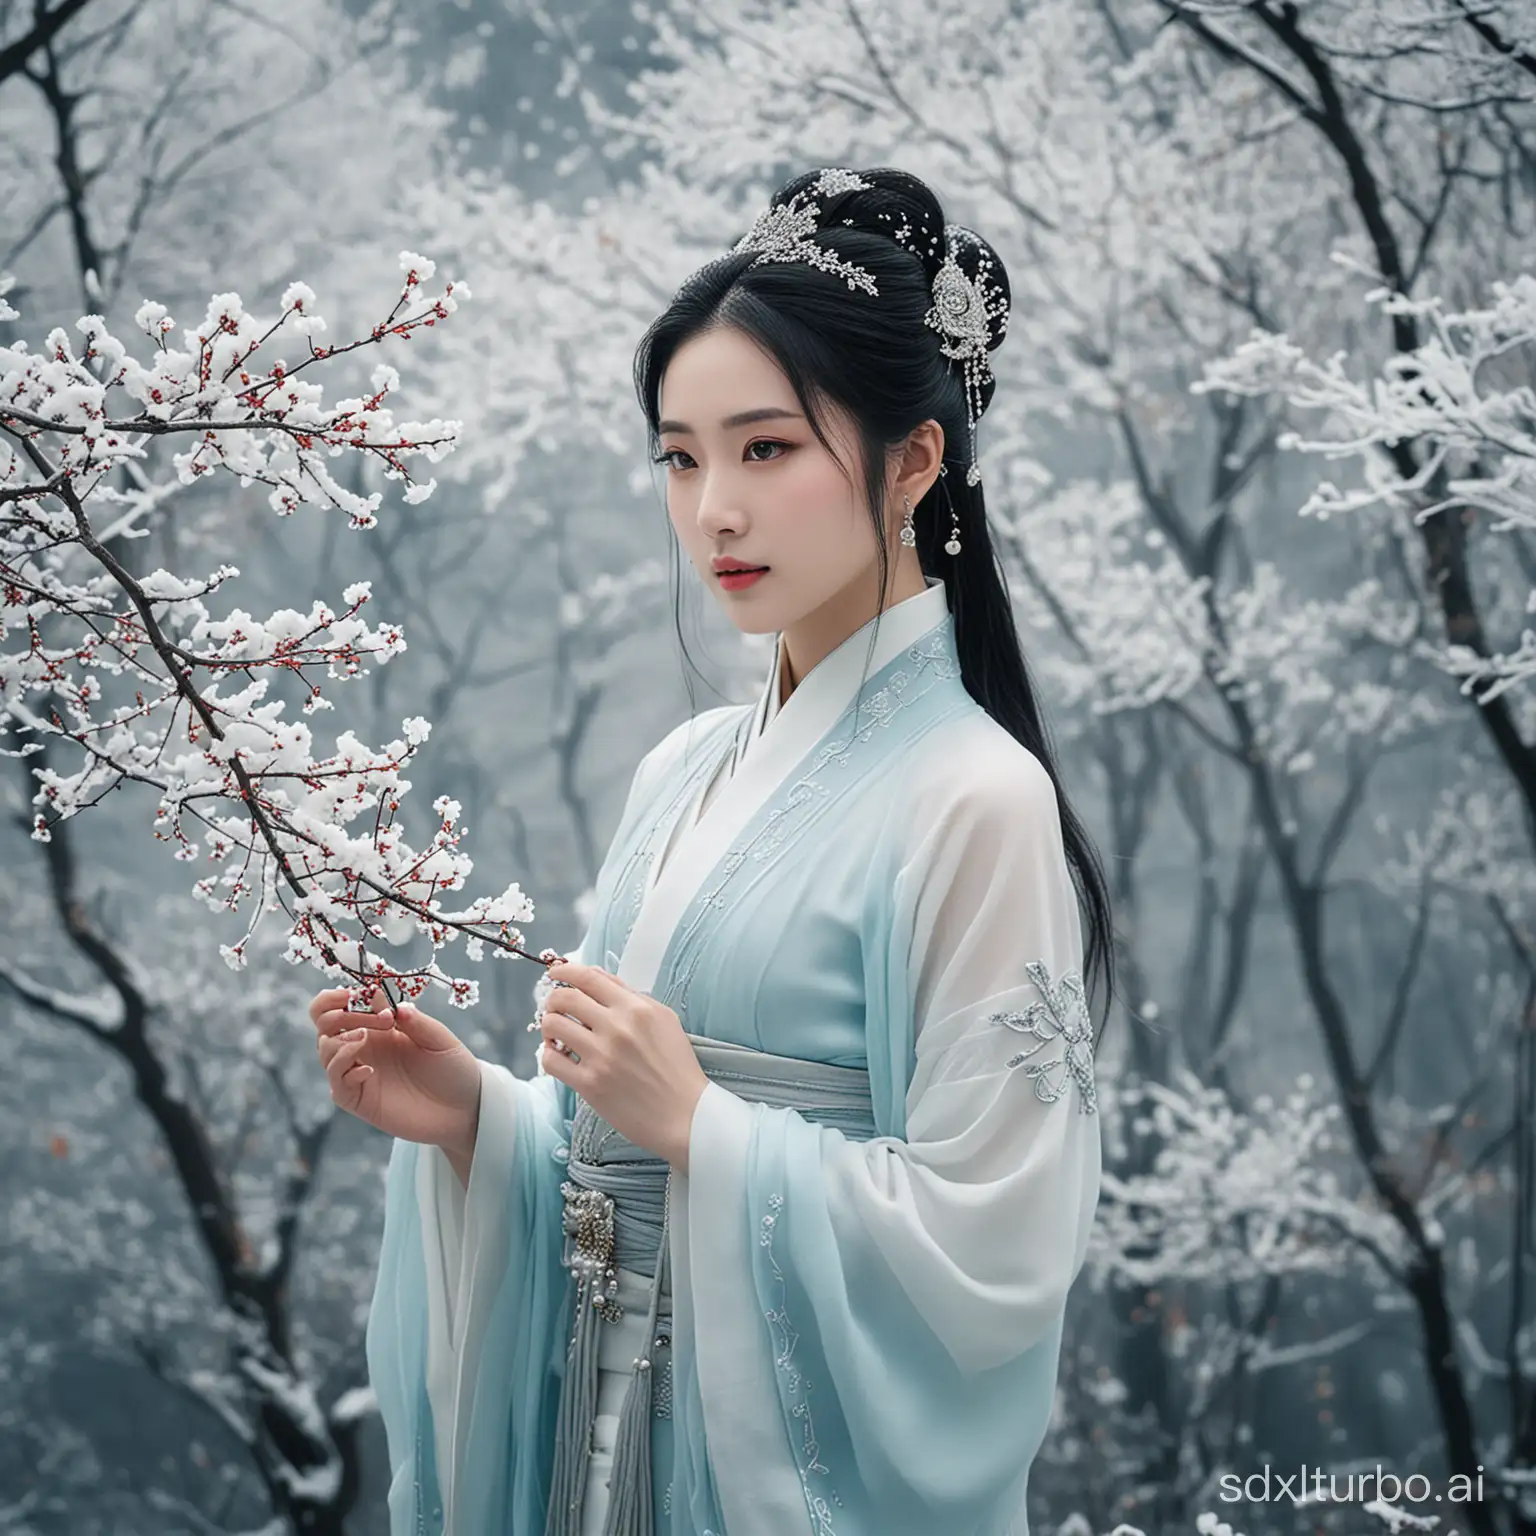 Ethereal-Goddess-Embracing-the-Cold-Beauty-of-China-with-Love